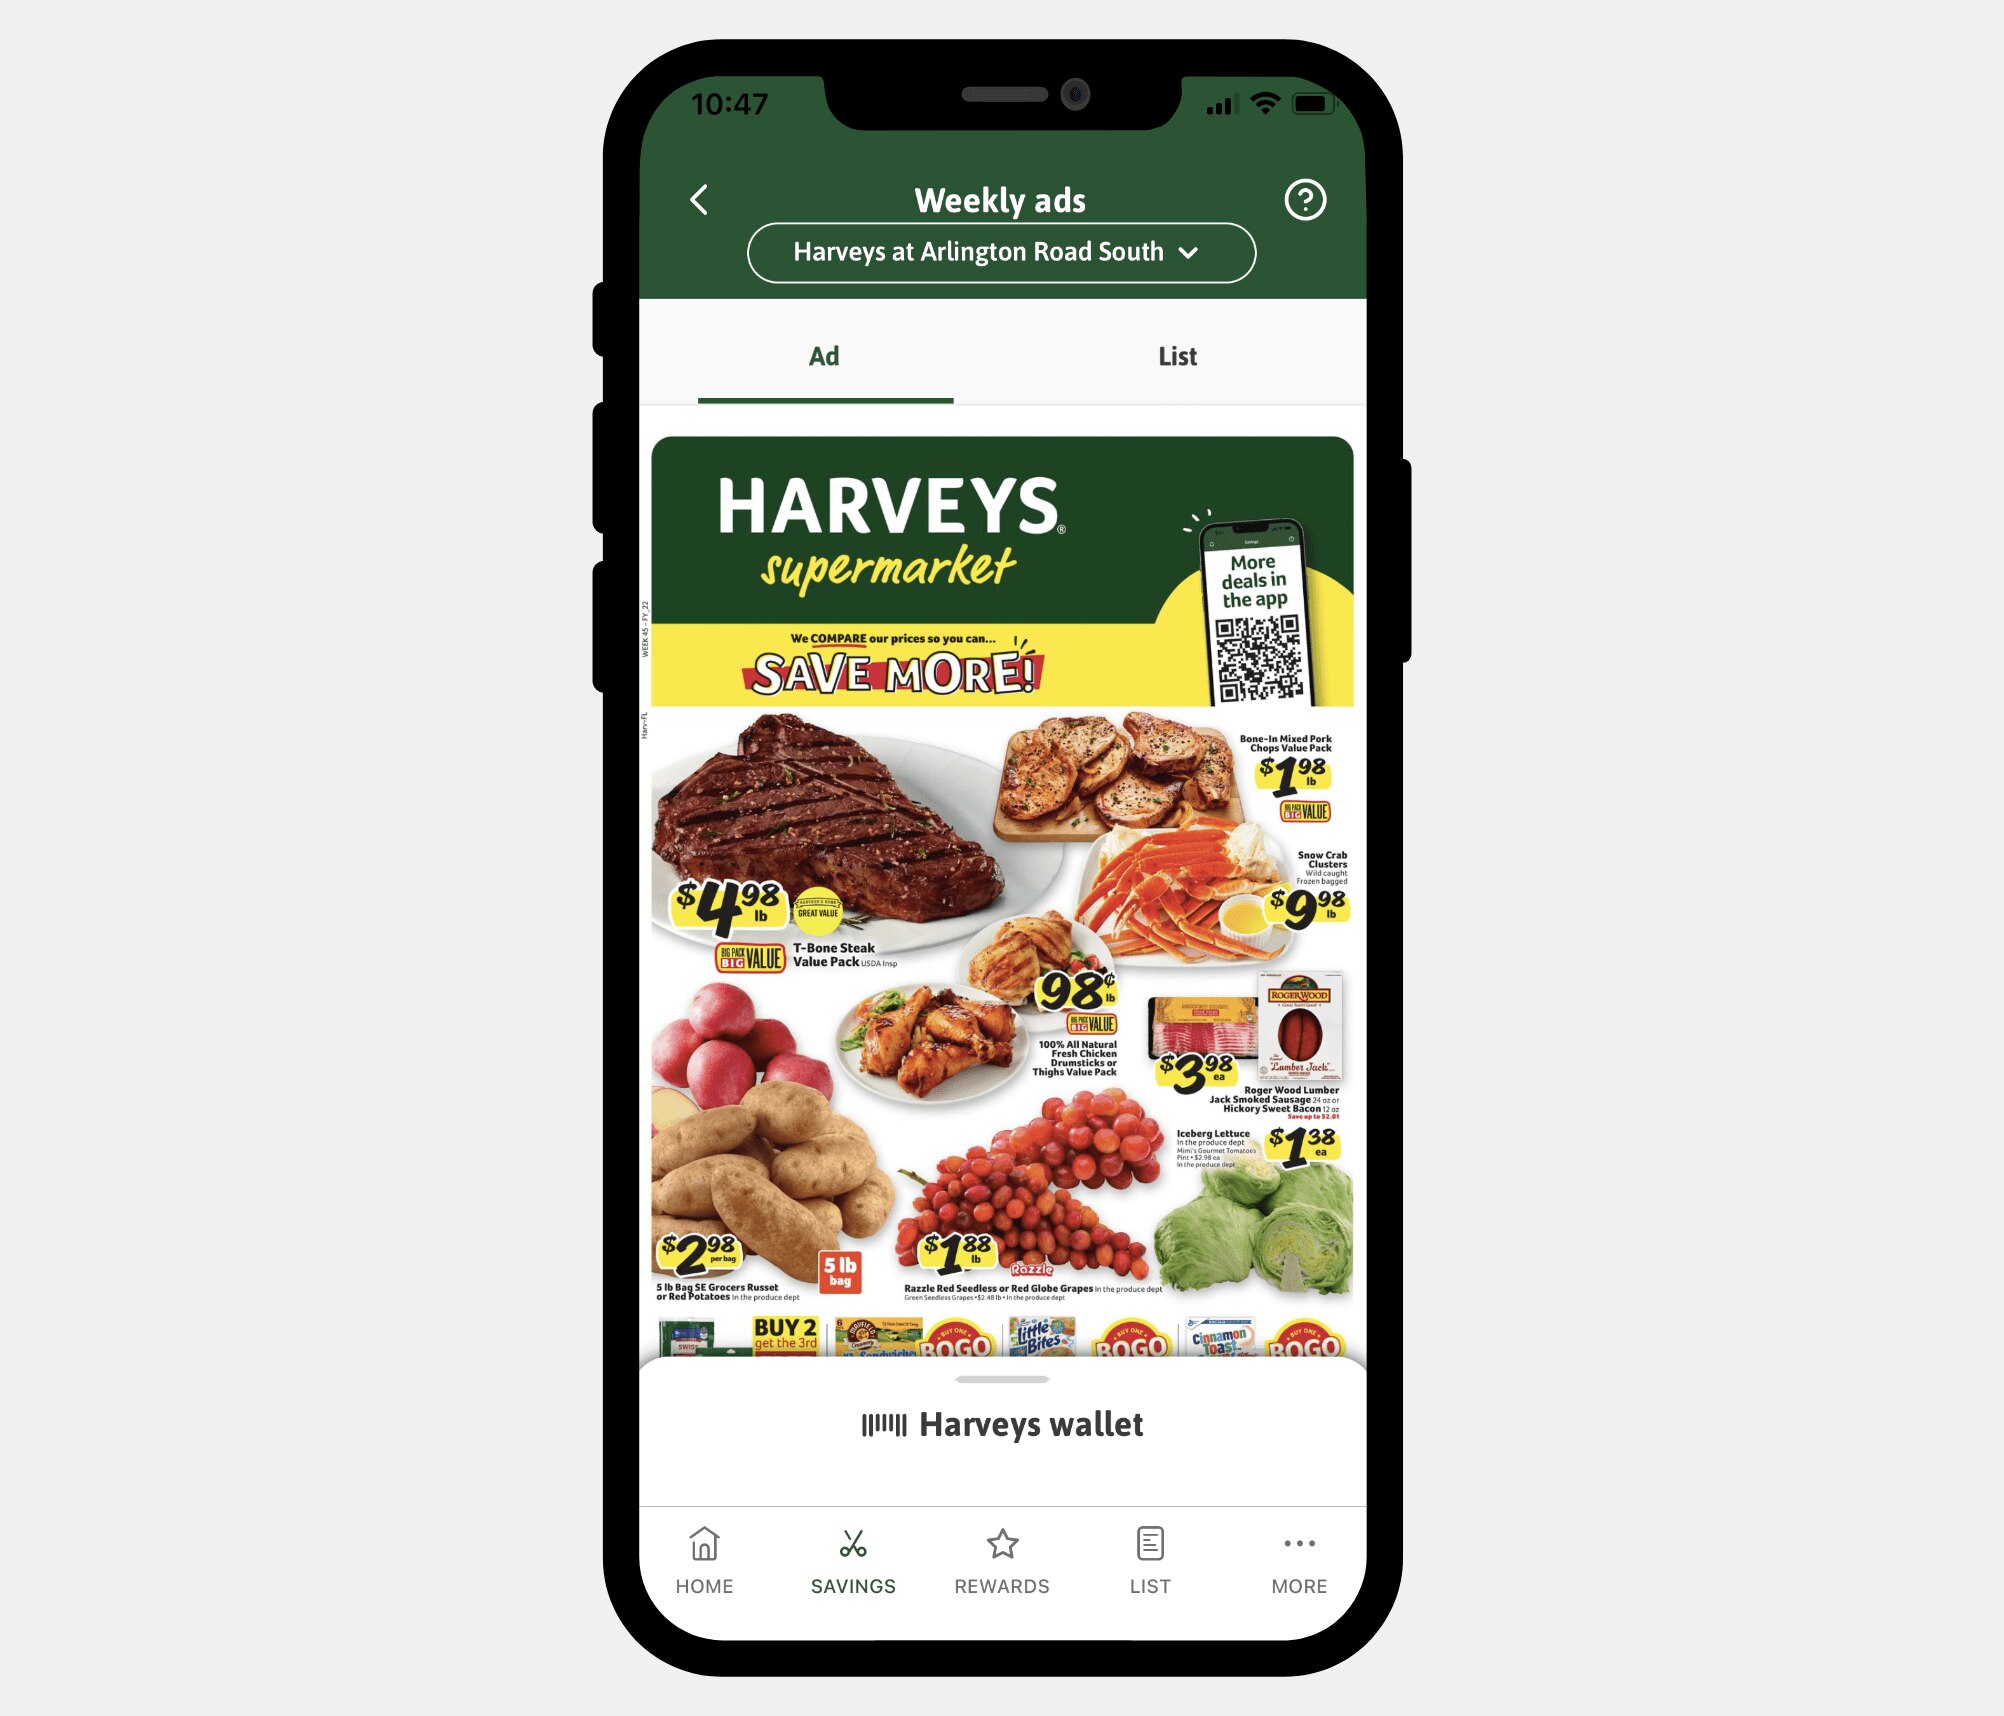 Image of a phone using the weekly ad feature on the Harveys app